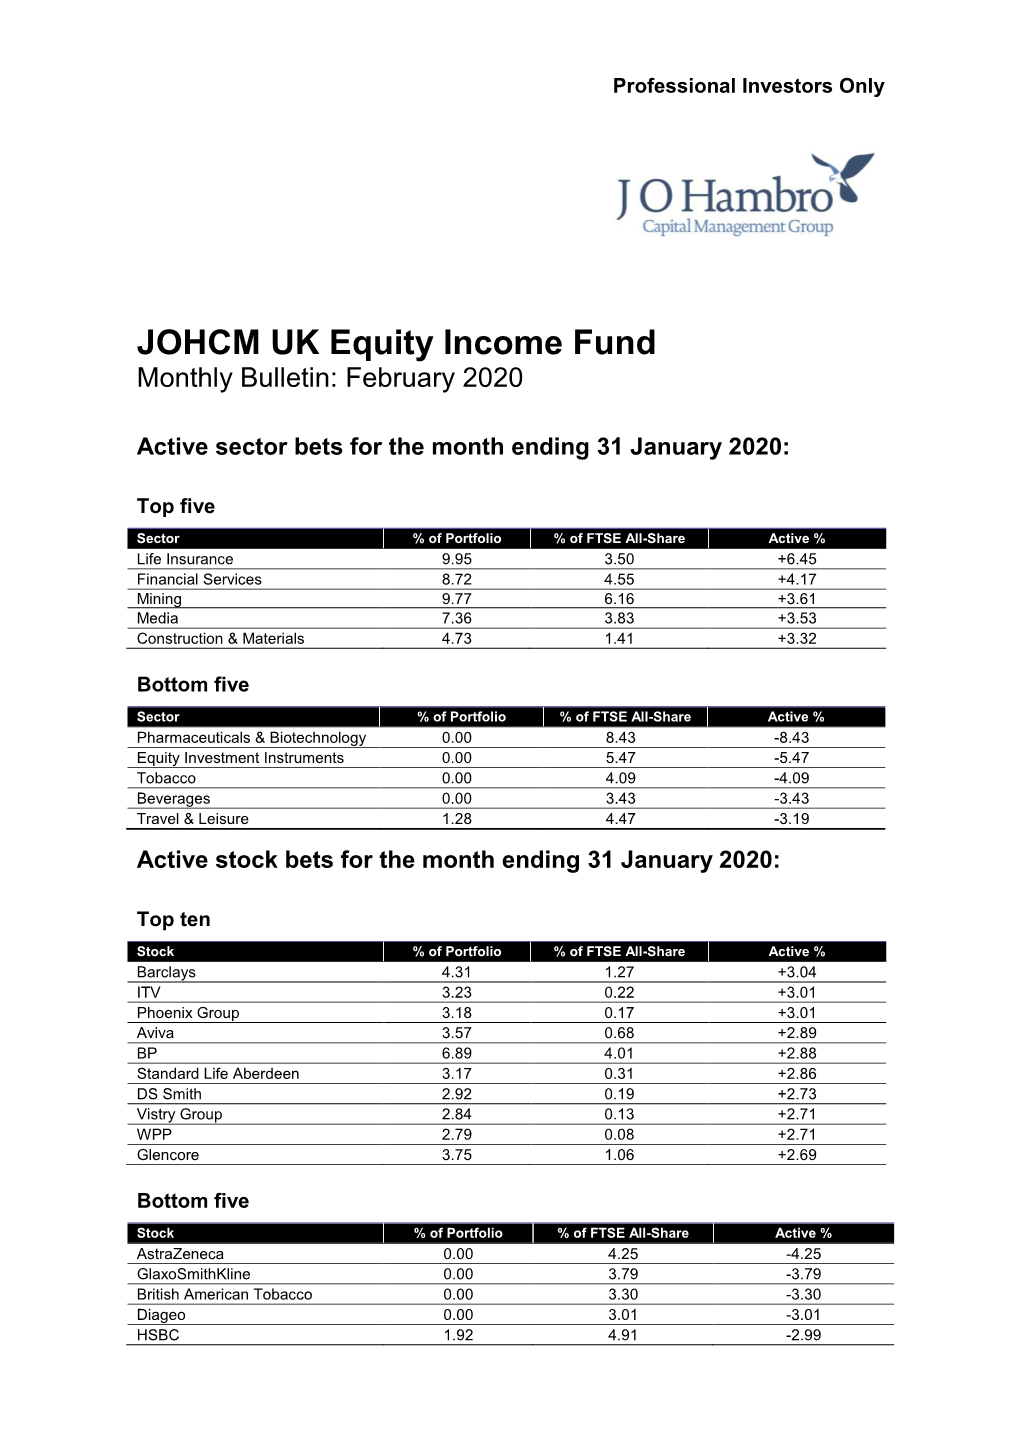 JOHCM UK Equity Income Fund Monthly Update